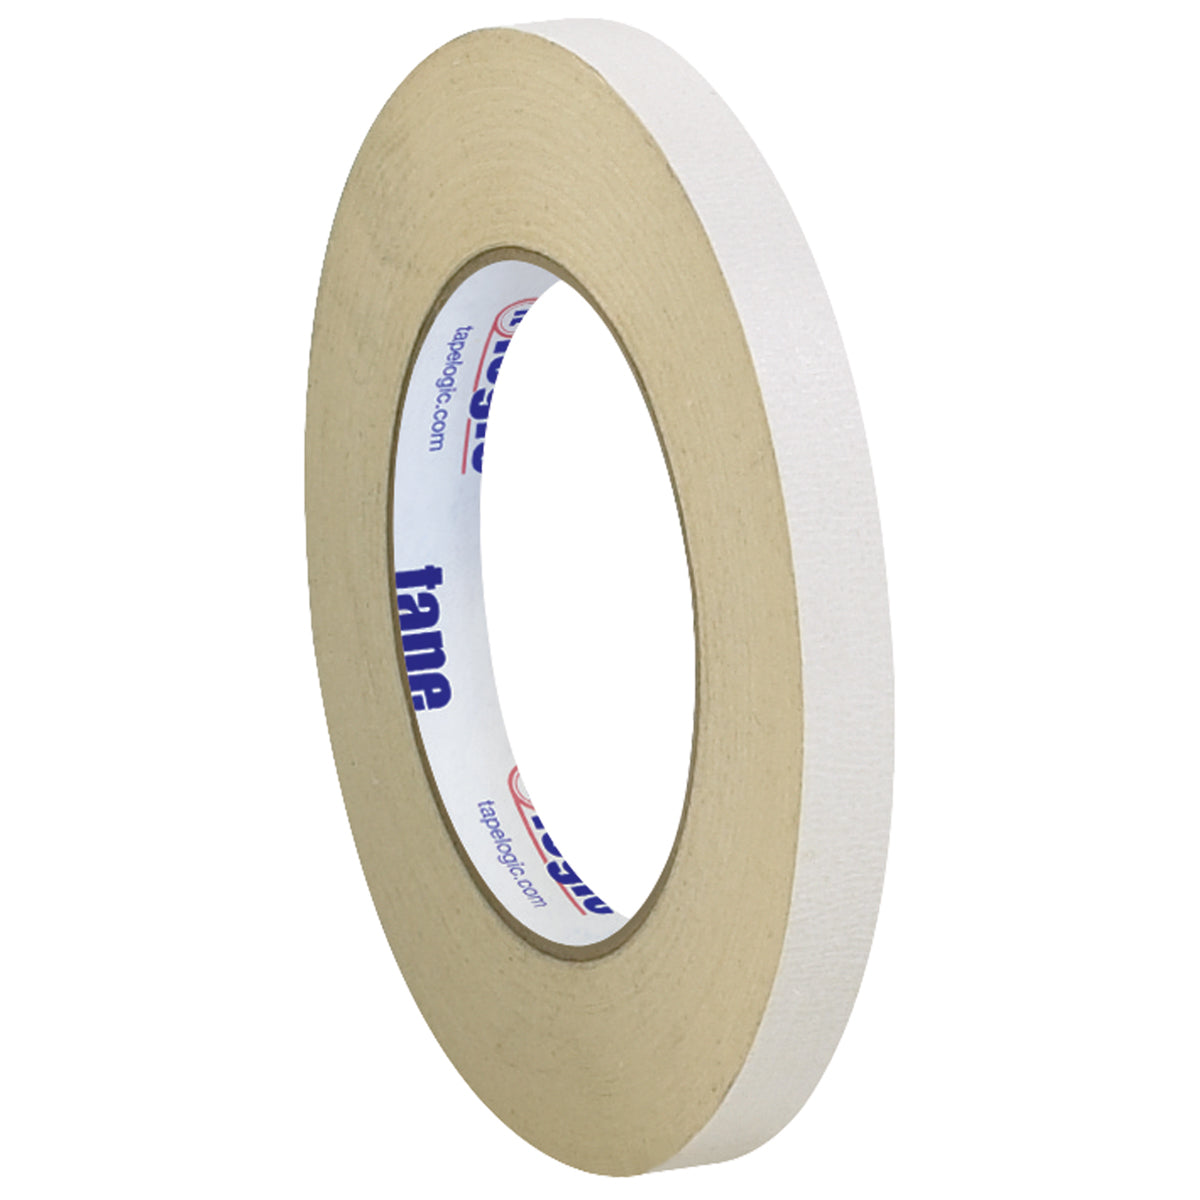 Double Sided Tape - 1 x 36 Yards